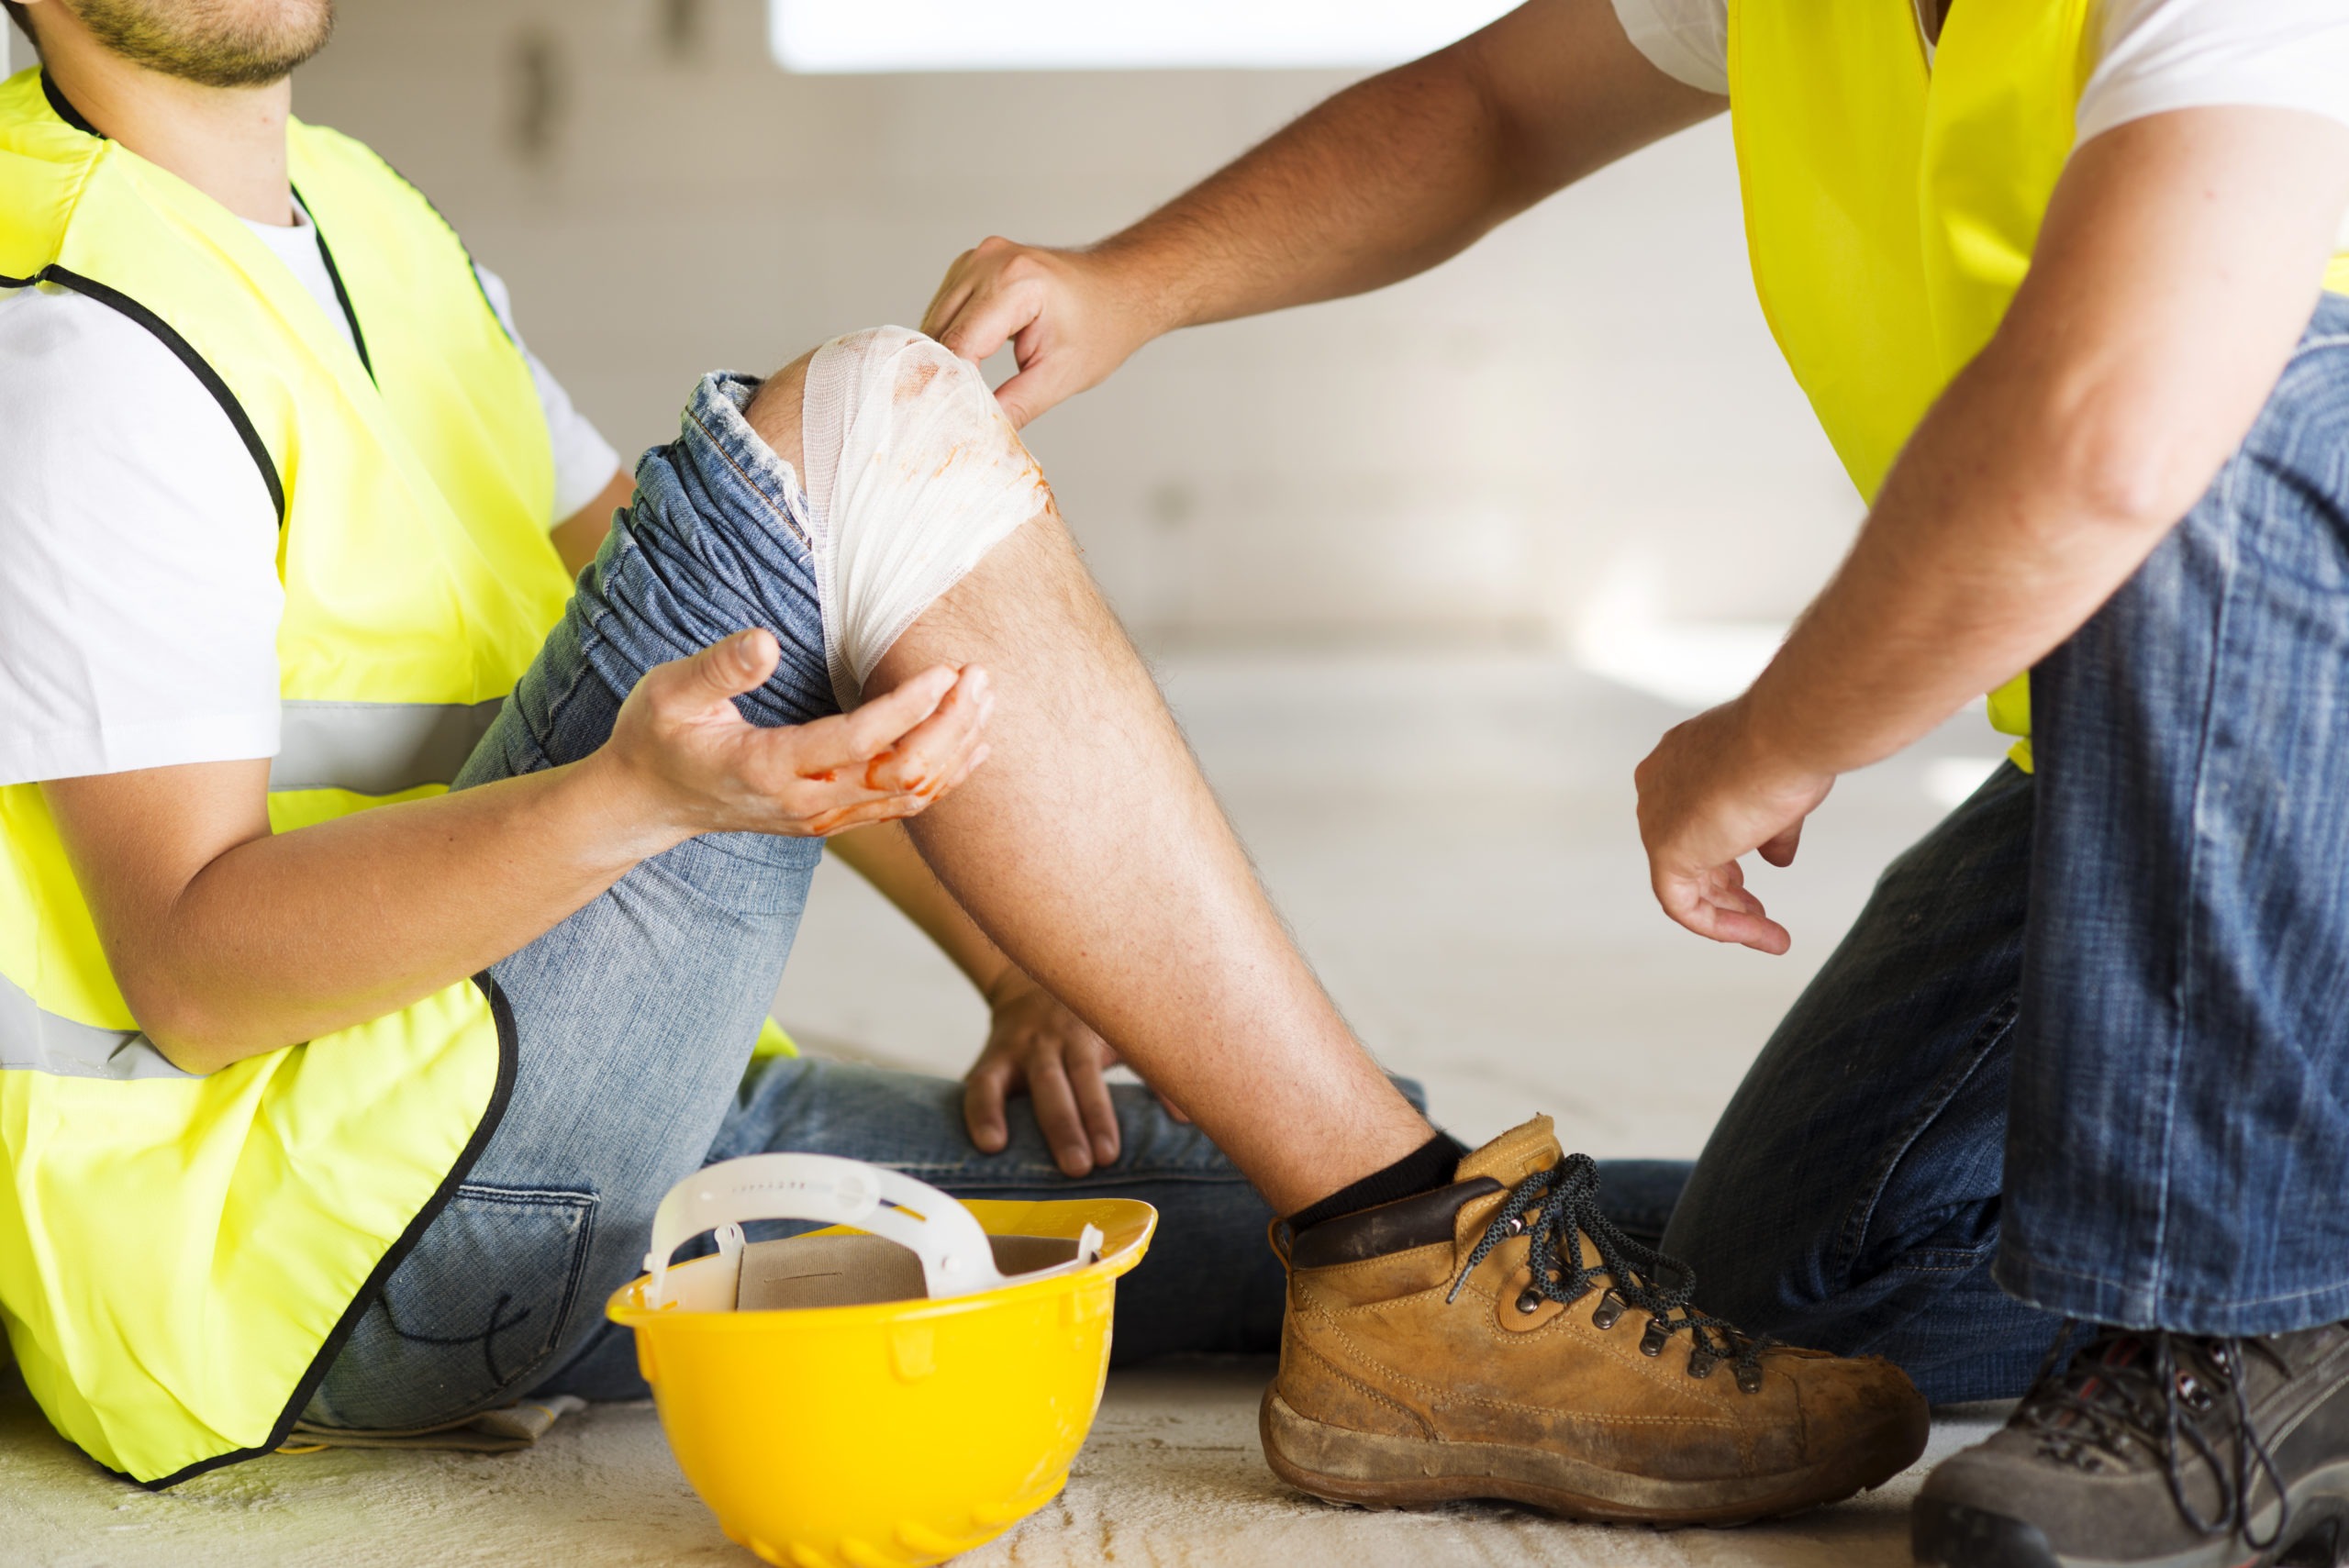 construction boom in ny means more accidents and injuries for workers